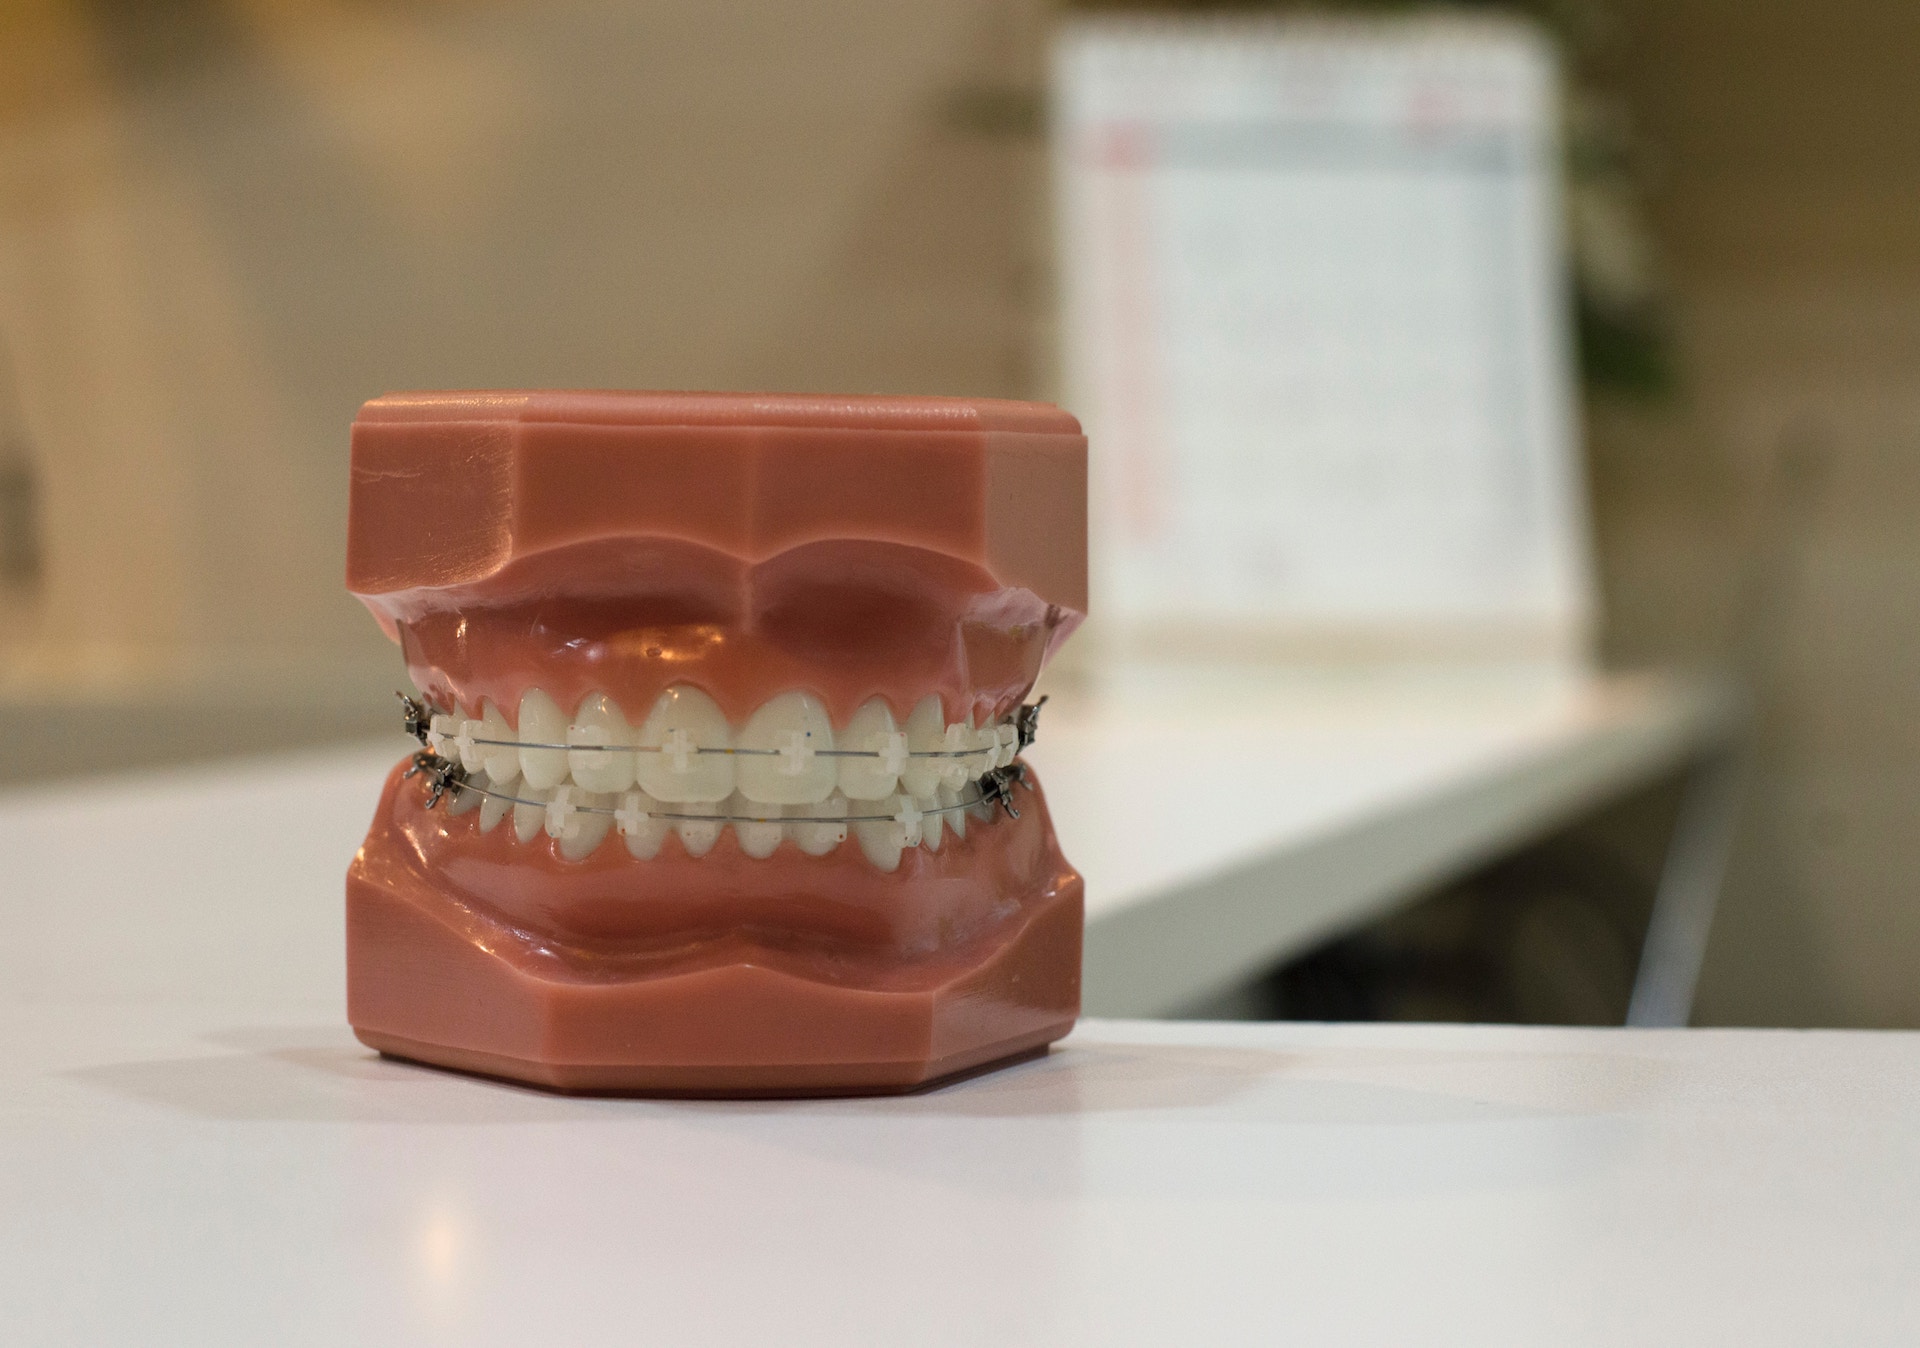 Buying a dental practice